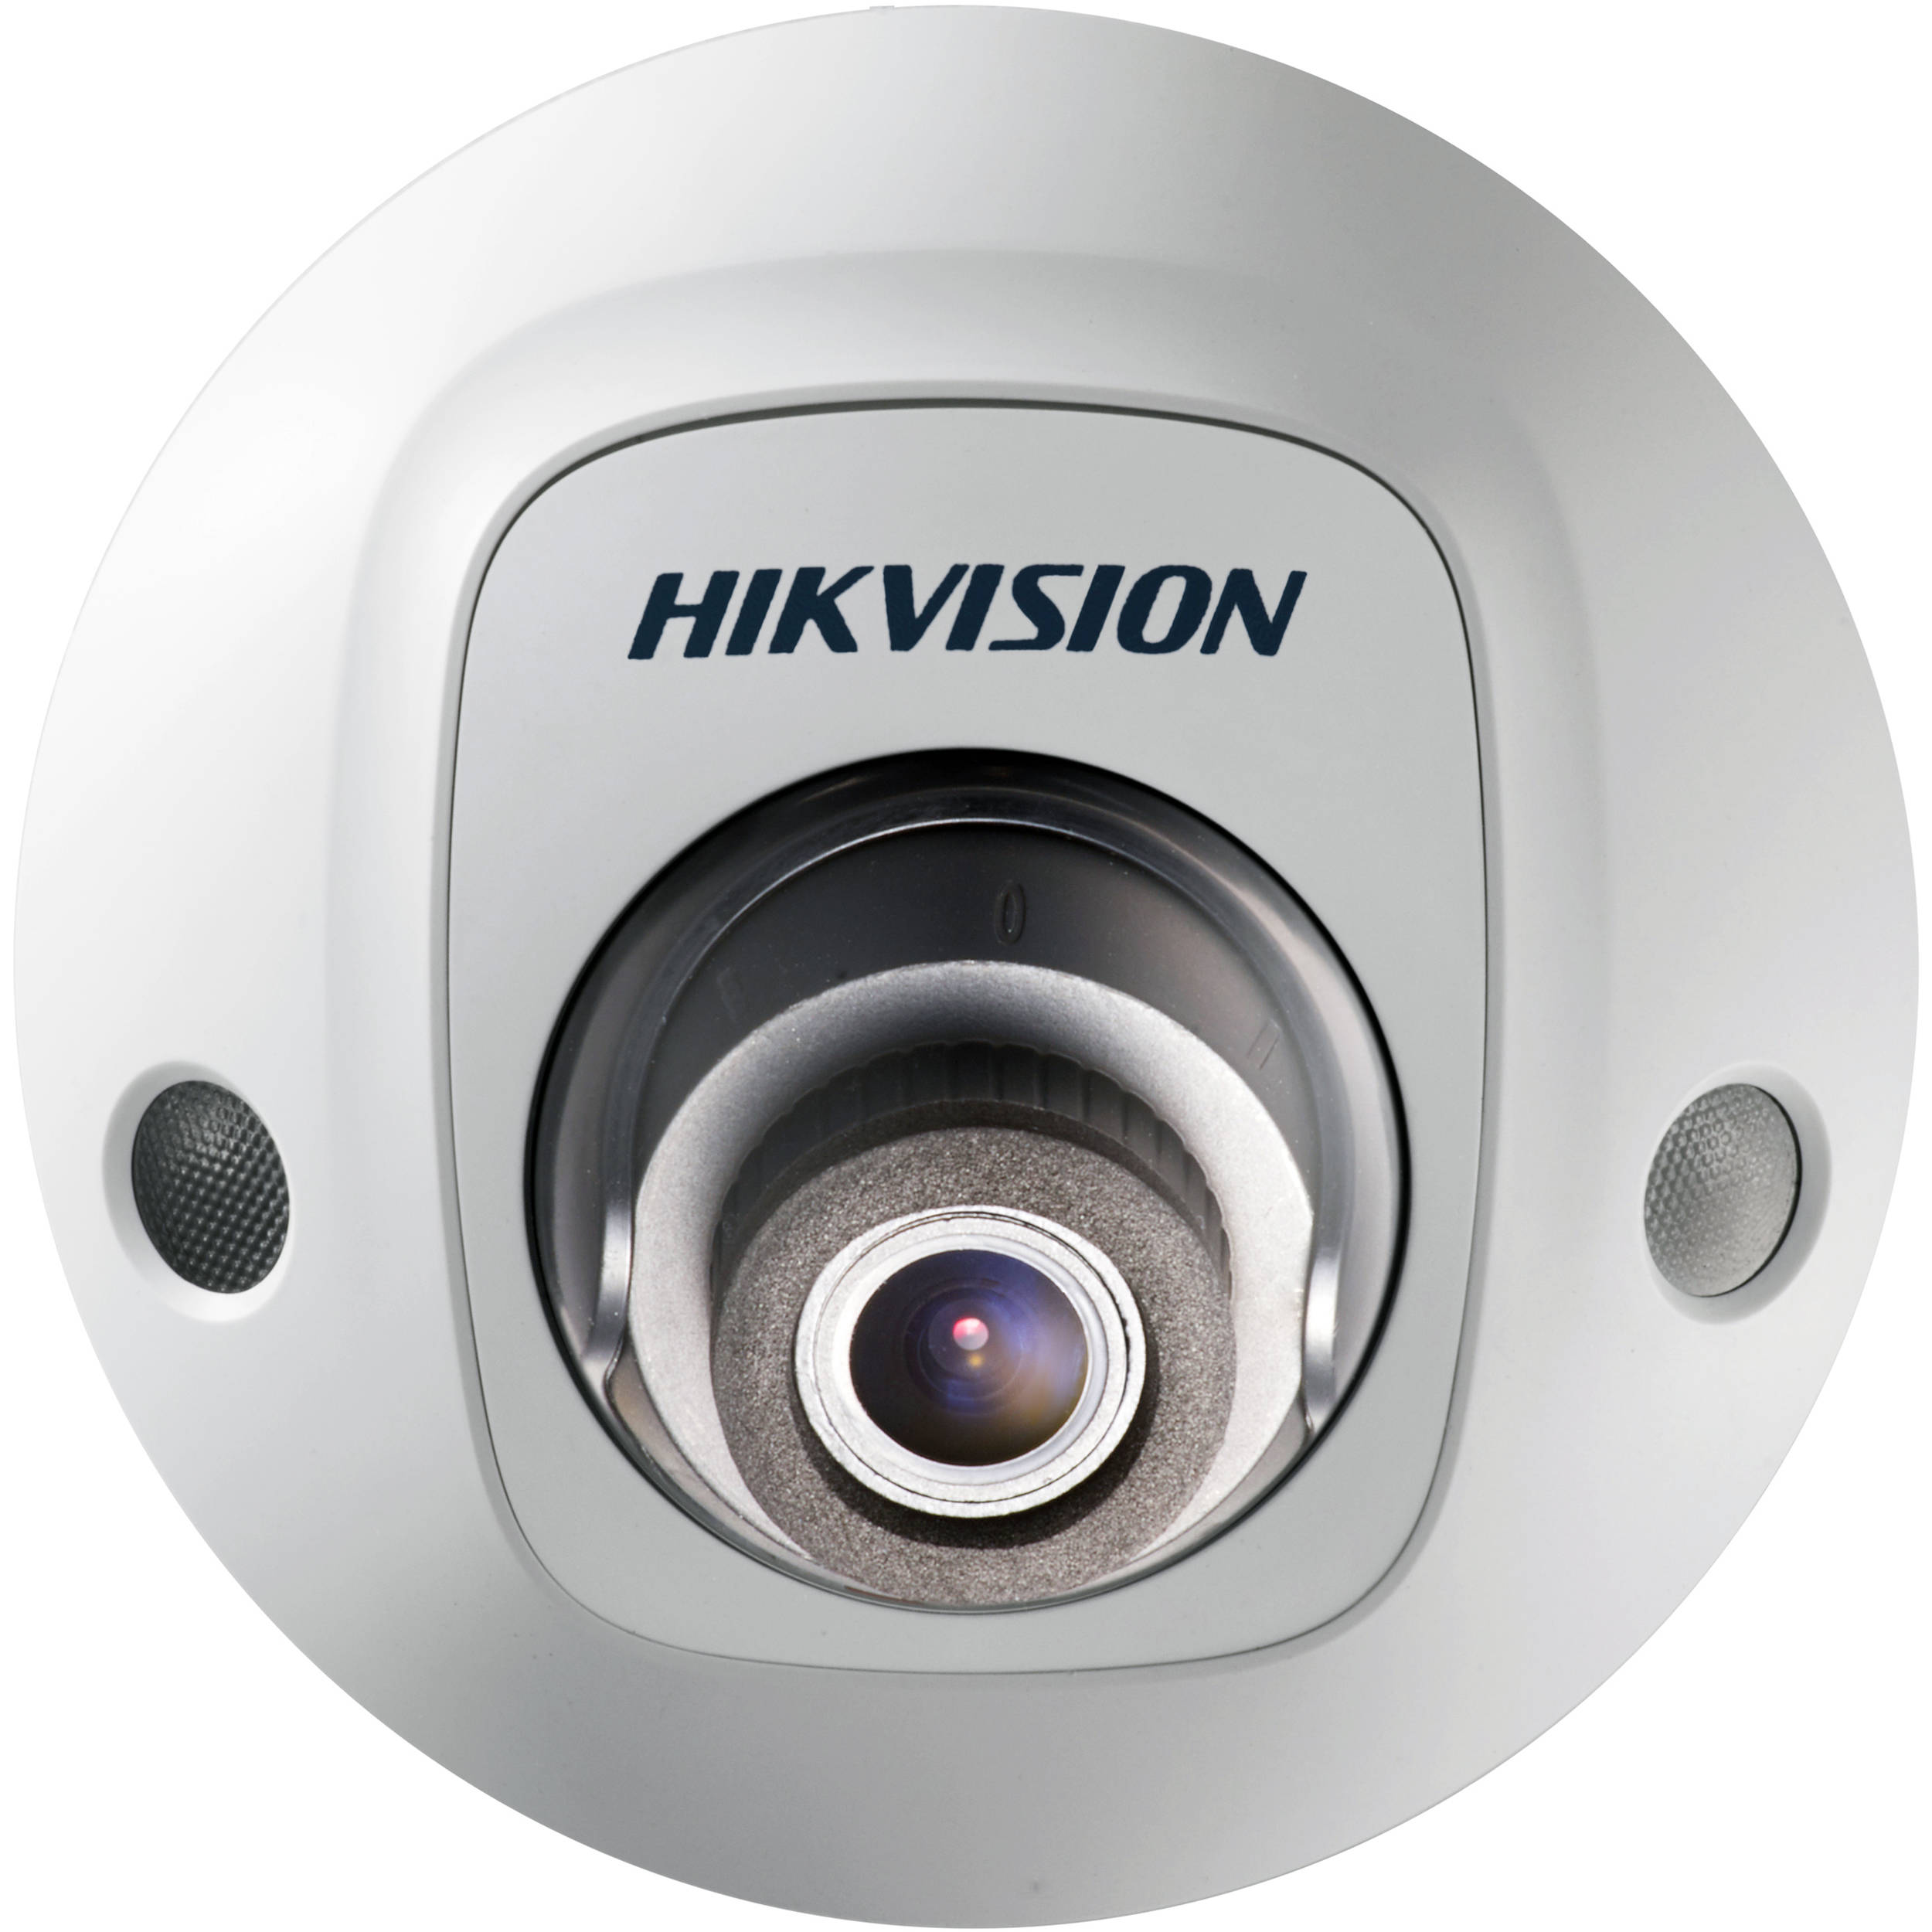 HIKVISION | COMPACT DOME 5 MP
DAY/NIGHT 4MM